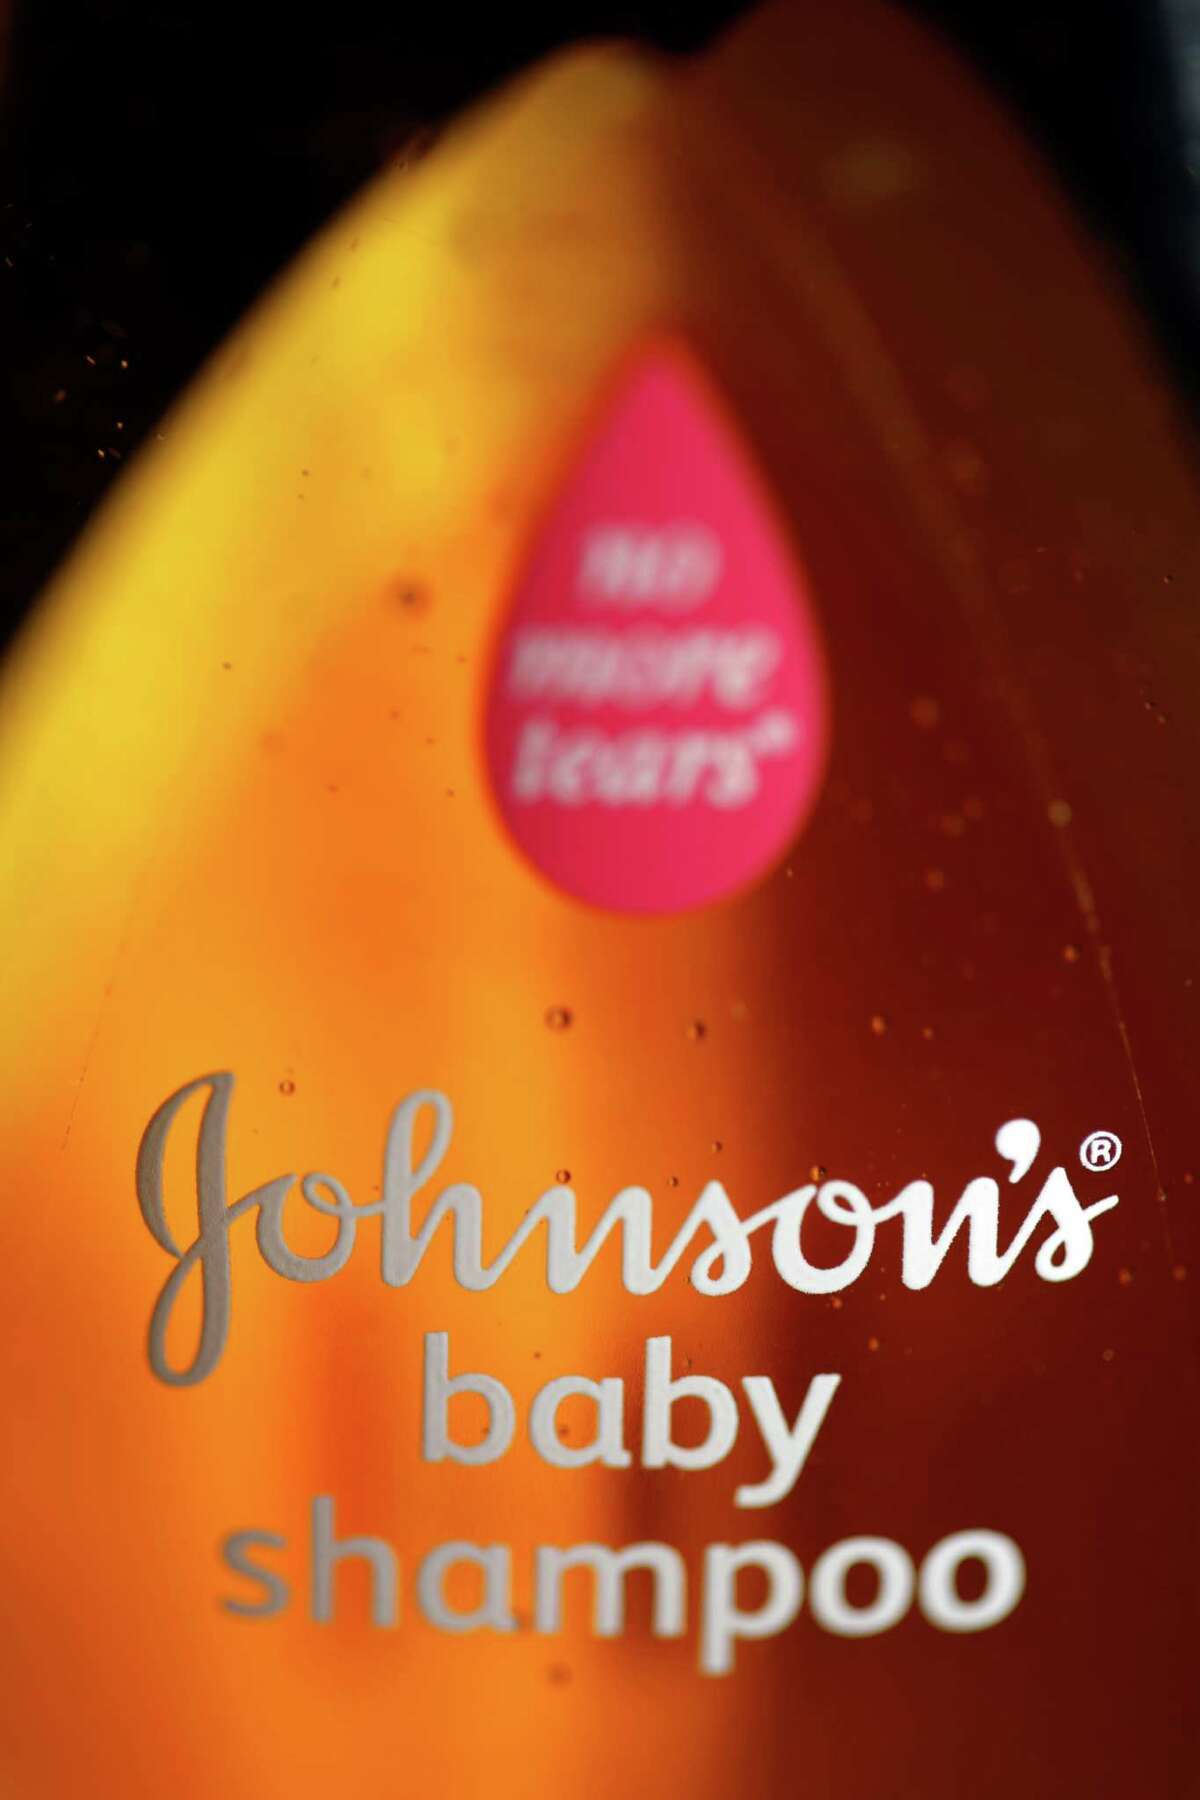 Johnson & Johnson reformulated its baby products, including its No More Tears shampoo.